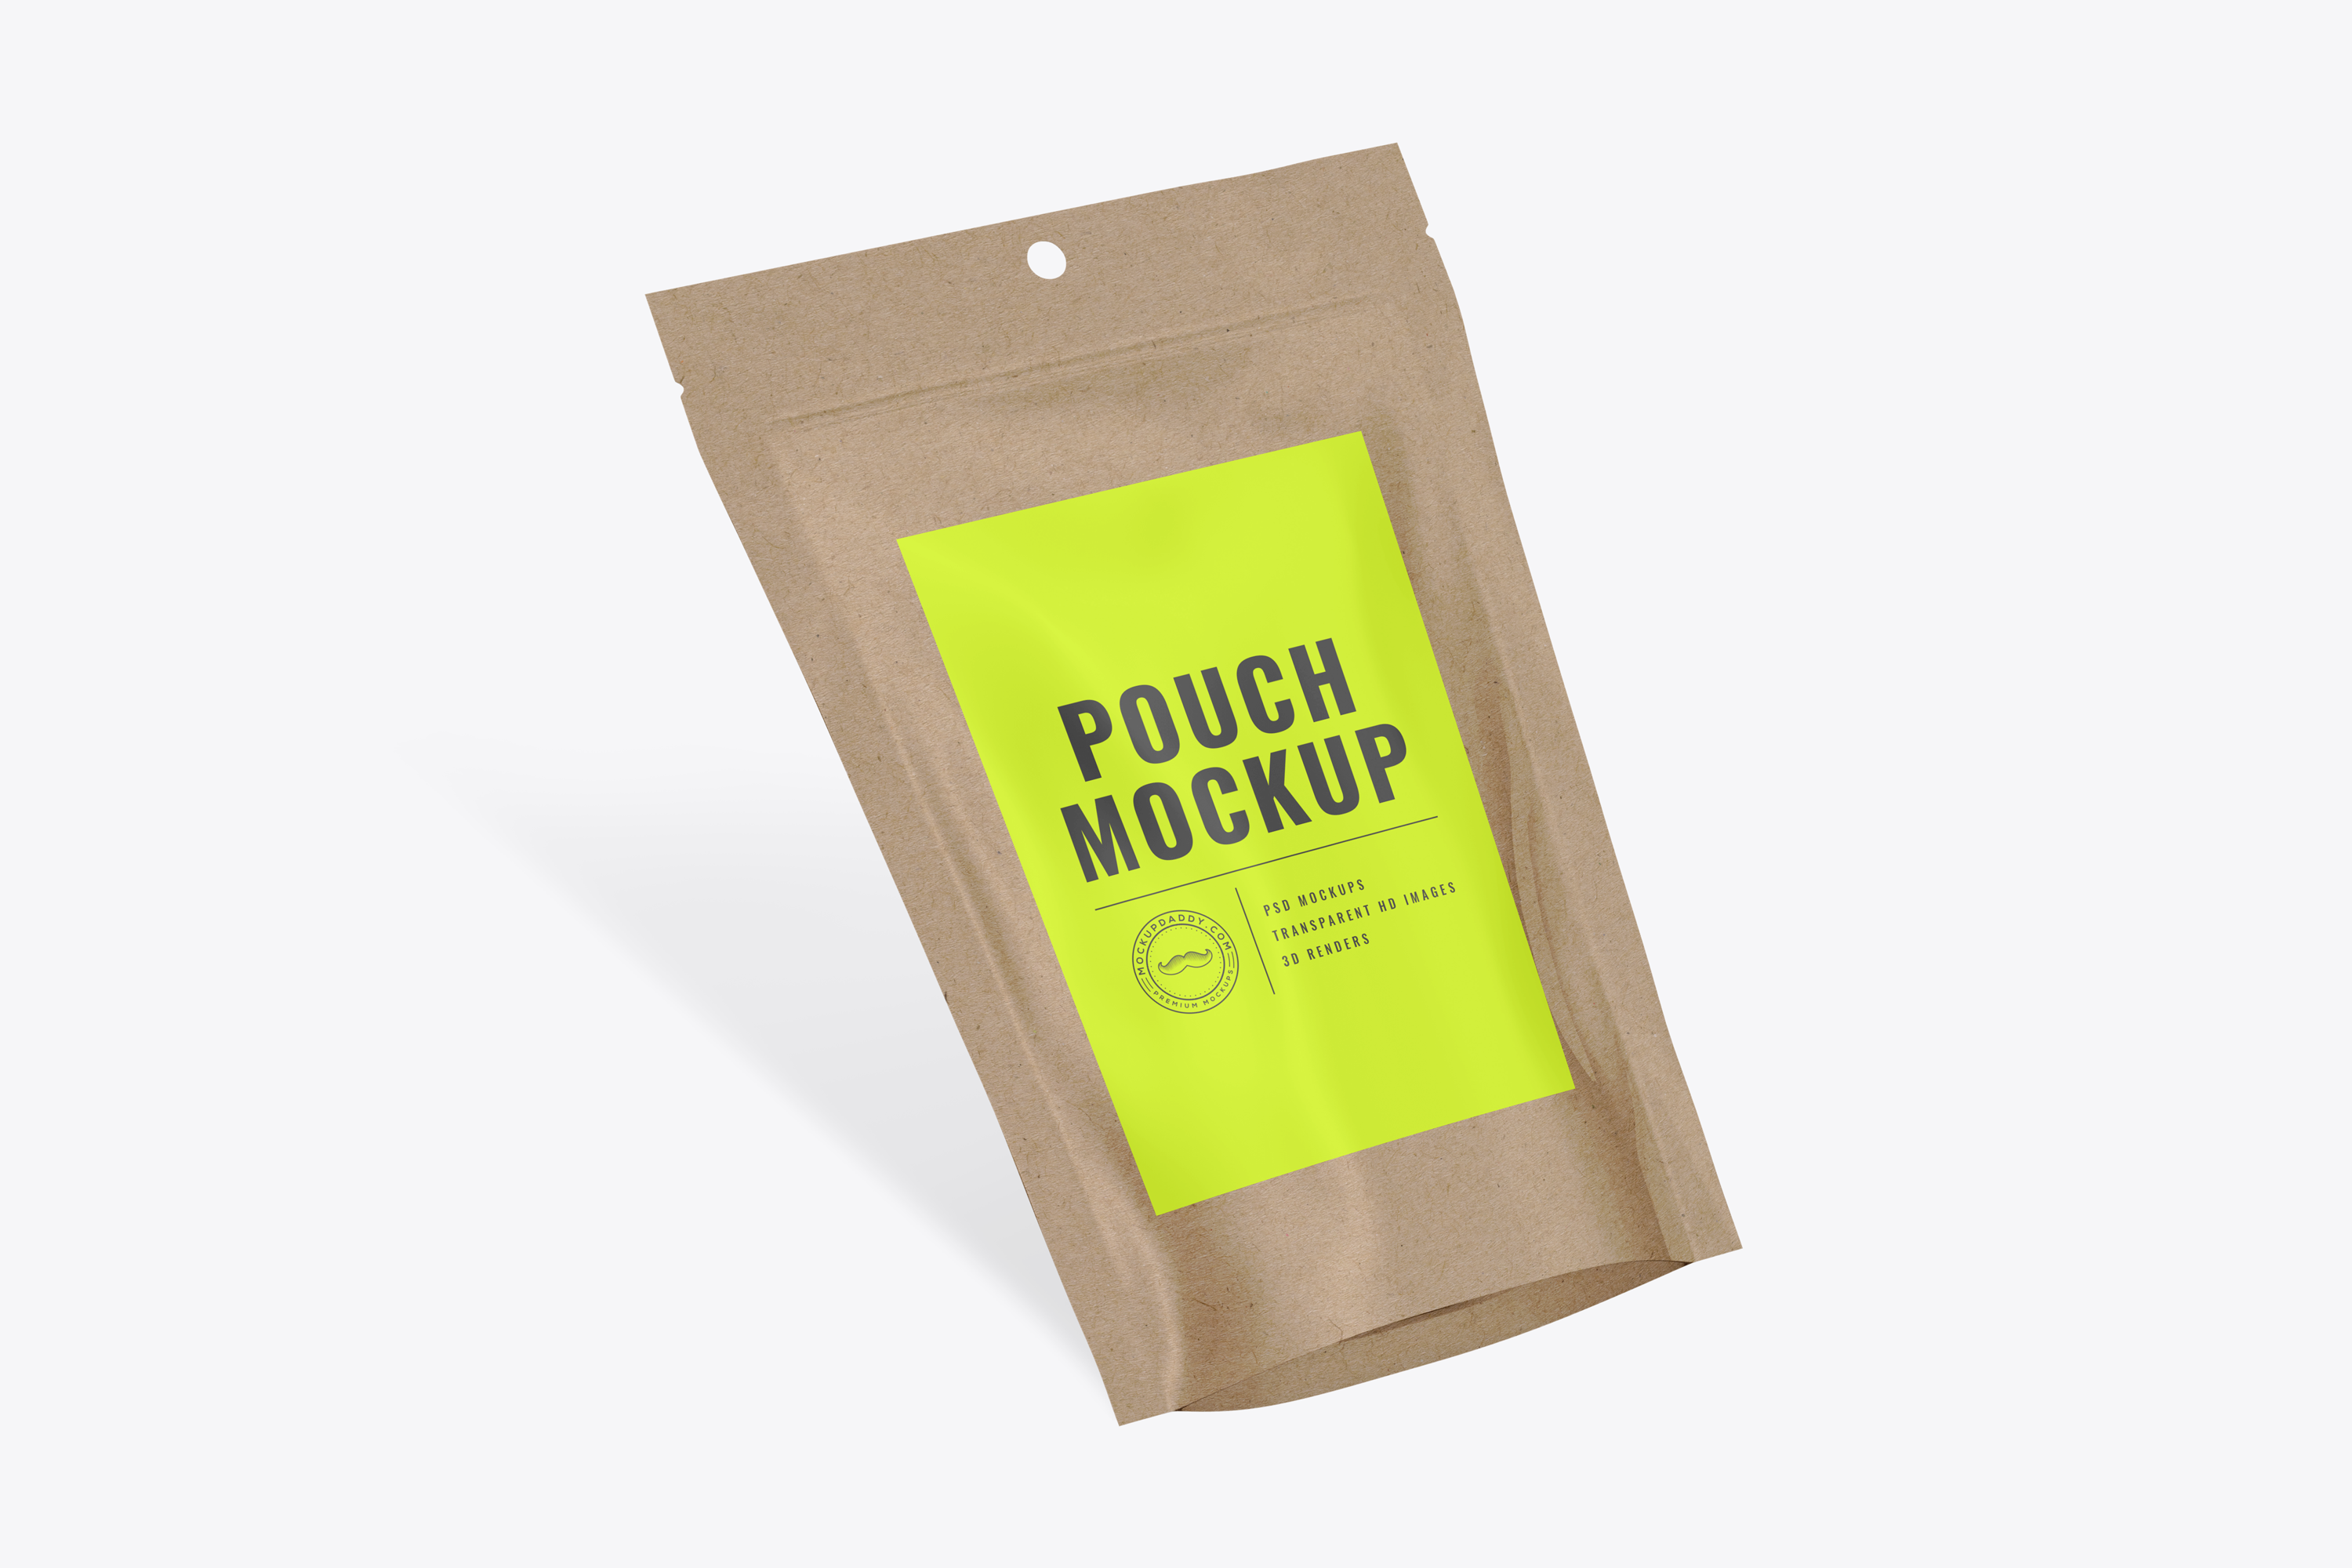 Brown paper pouch with zipper mockup isolated on white background.